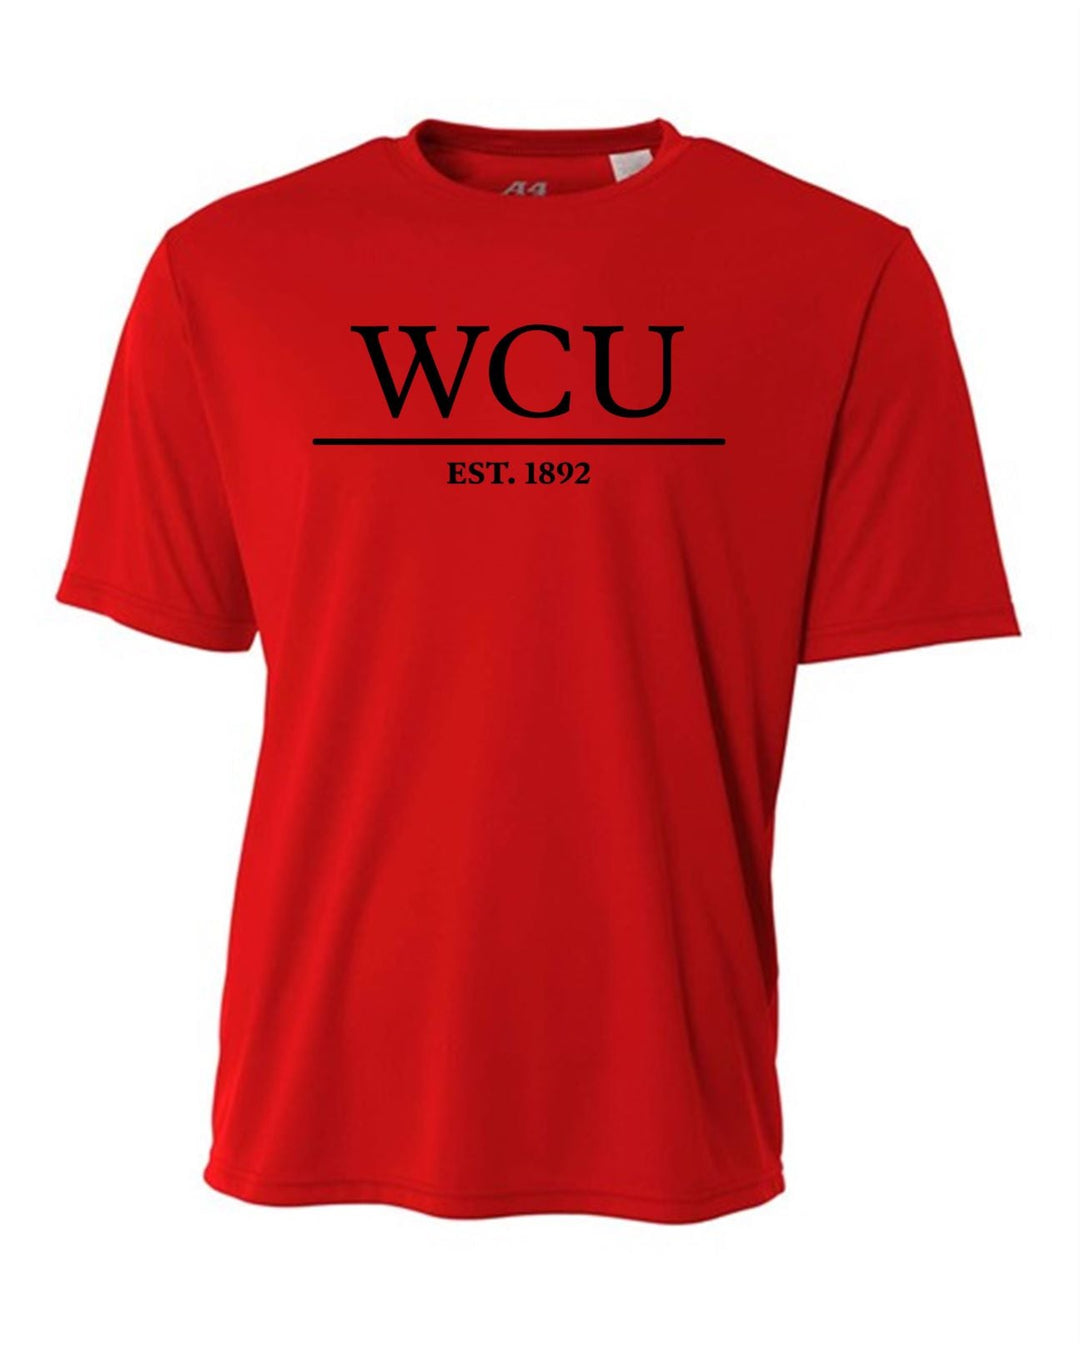 WCU College Of Osteopathic Medicine Youth Short-Sleeve Performance Shirt WCU OM Red Youth Small - Third Coast Soccer